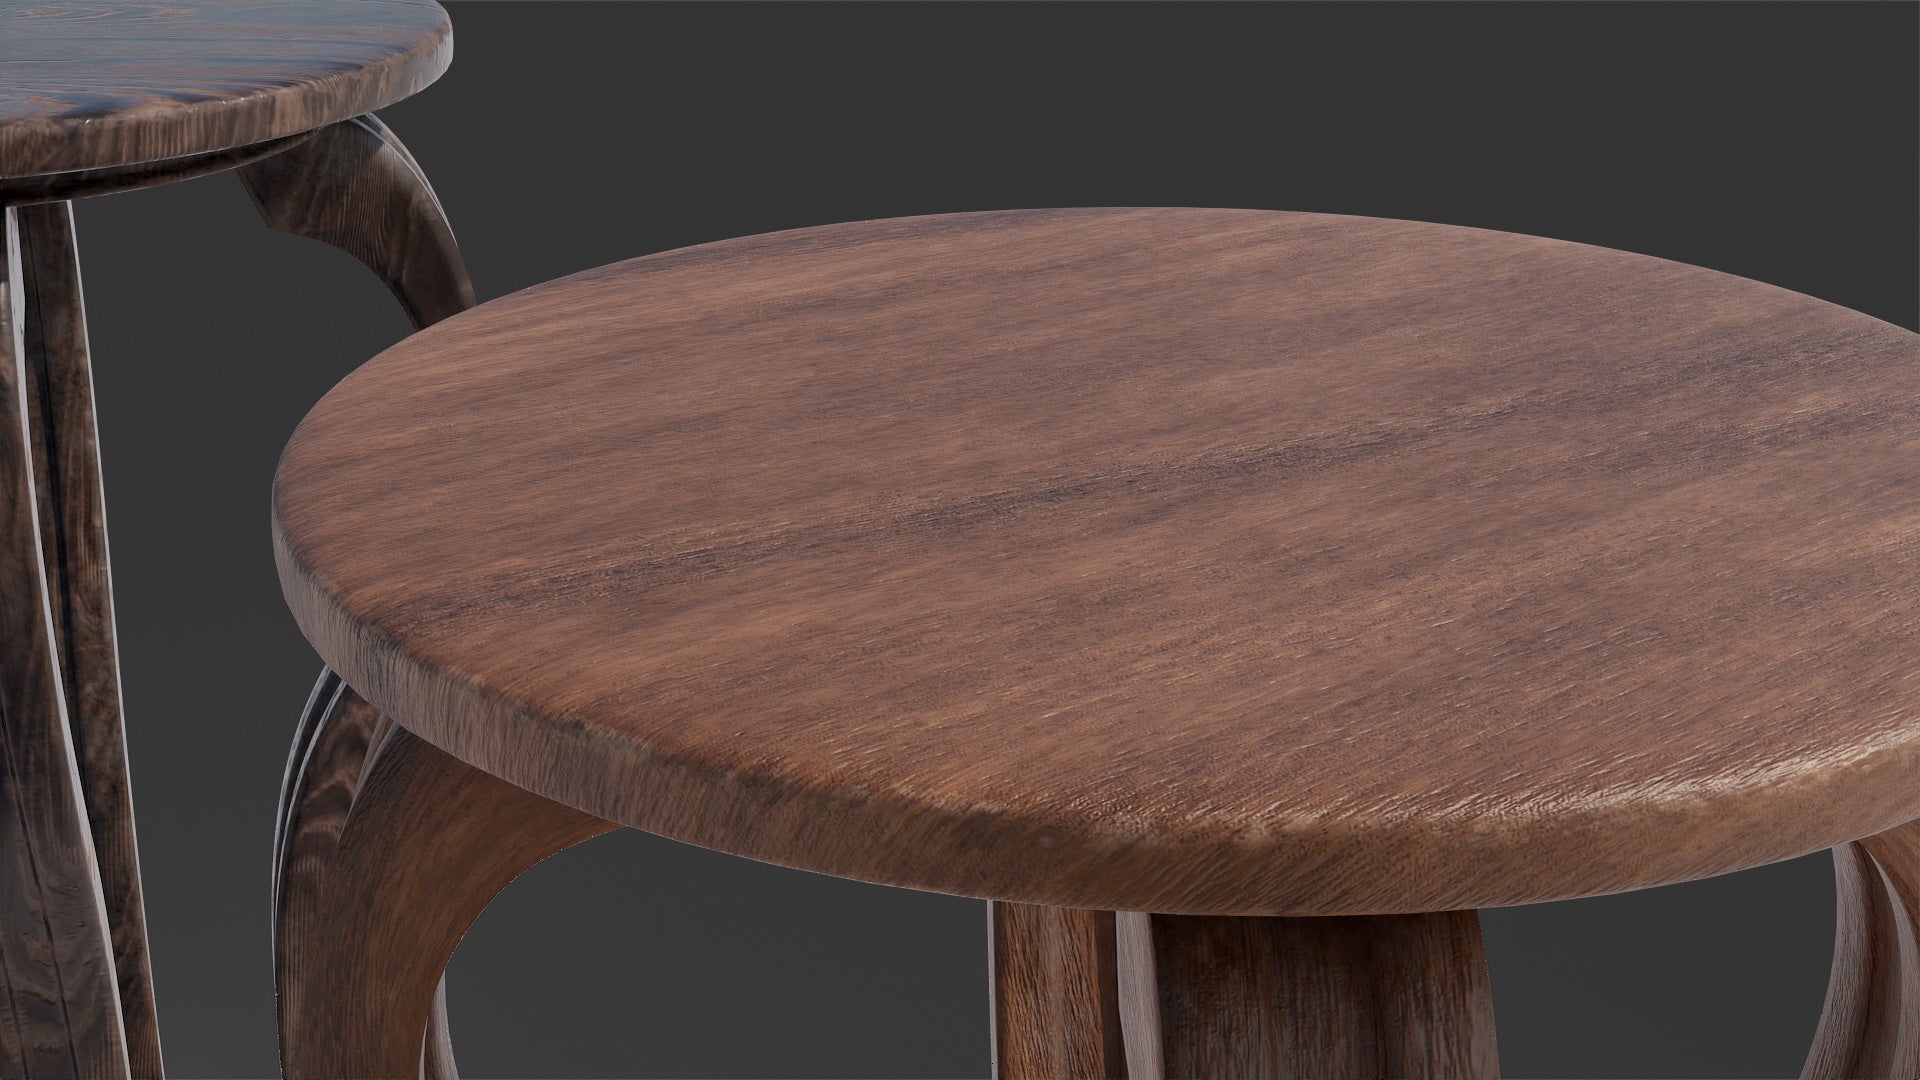 Edwardian style side table in four woods 3d model Blender and OBJ with low polycount and PBR textures